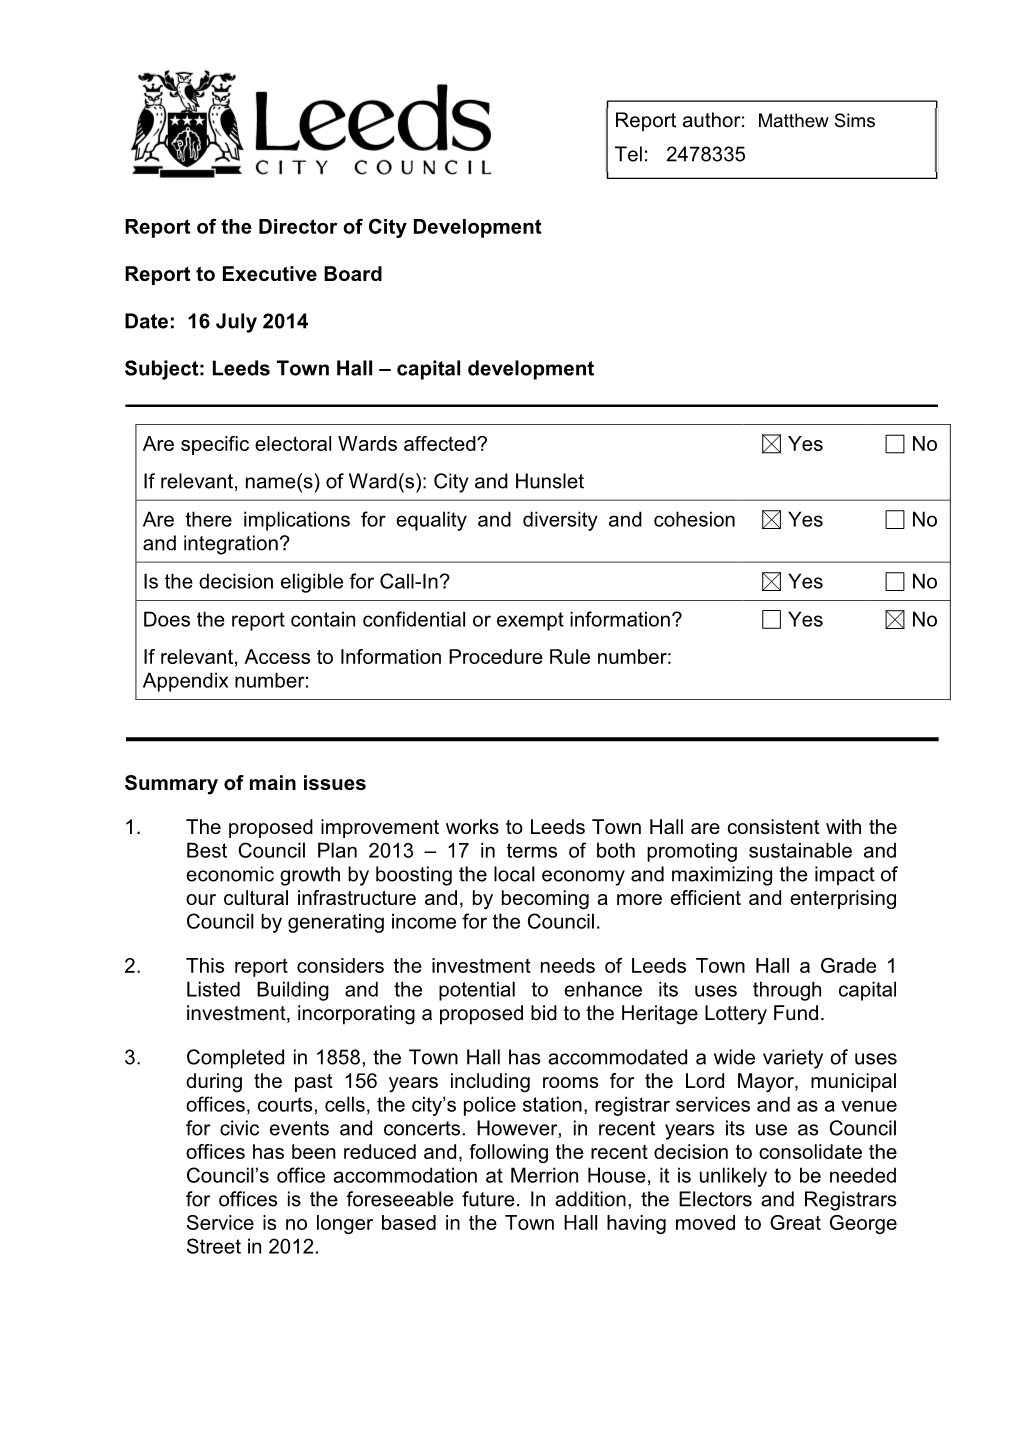 Report of the Director of City Development Report to Executive Board Date: 16 July 2014 Subject: Leeds Town Hall – Capital De